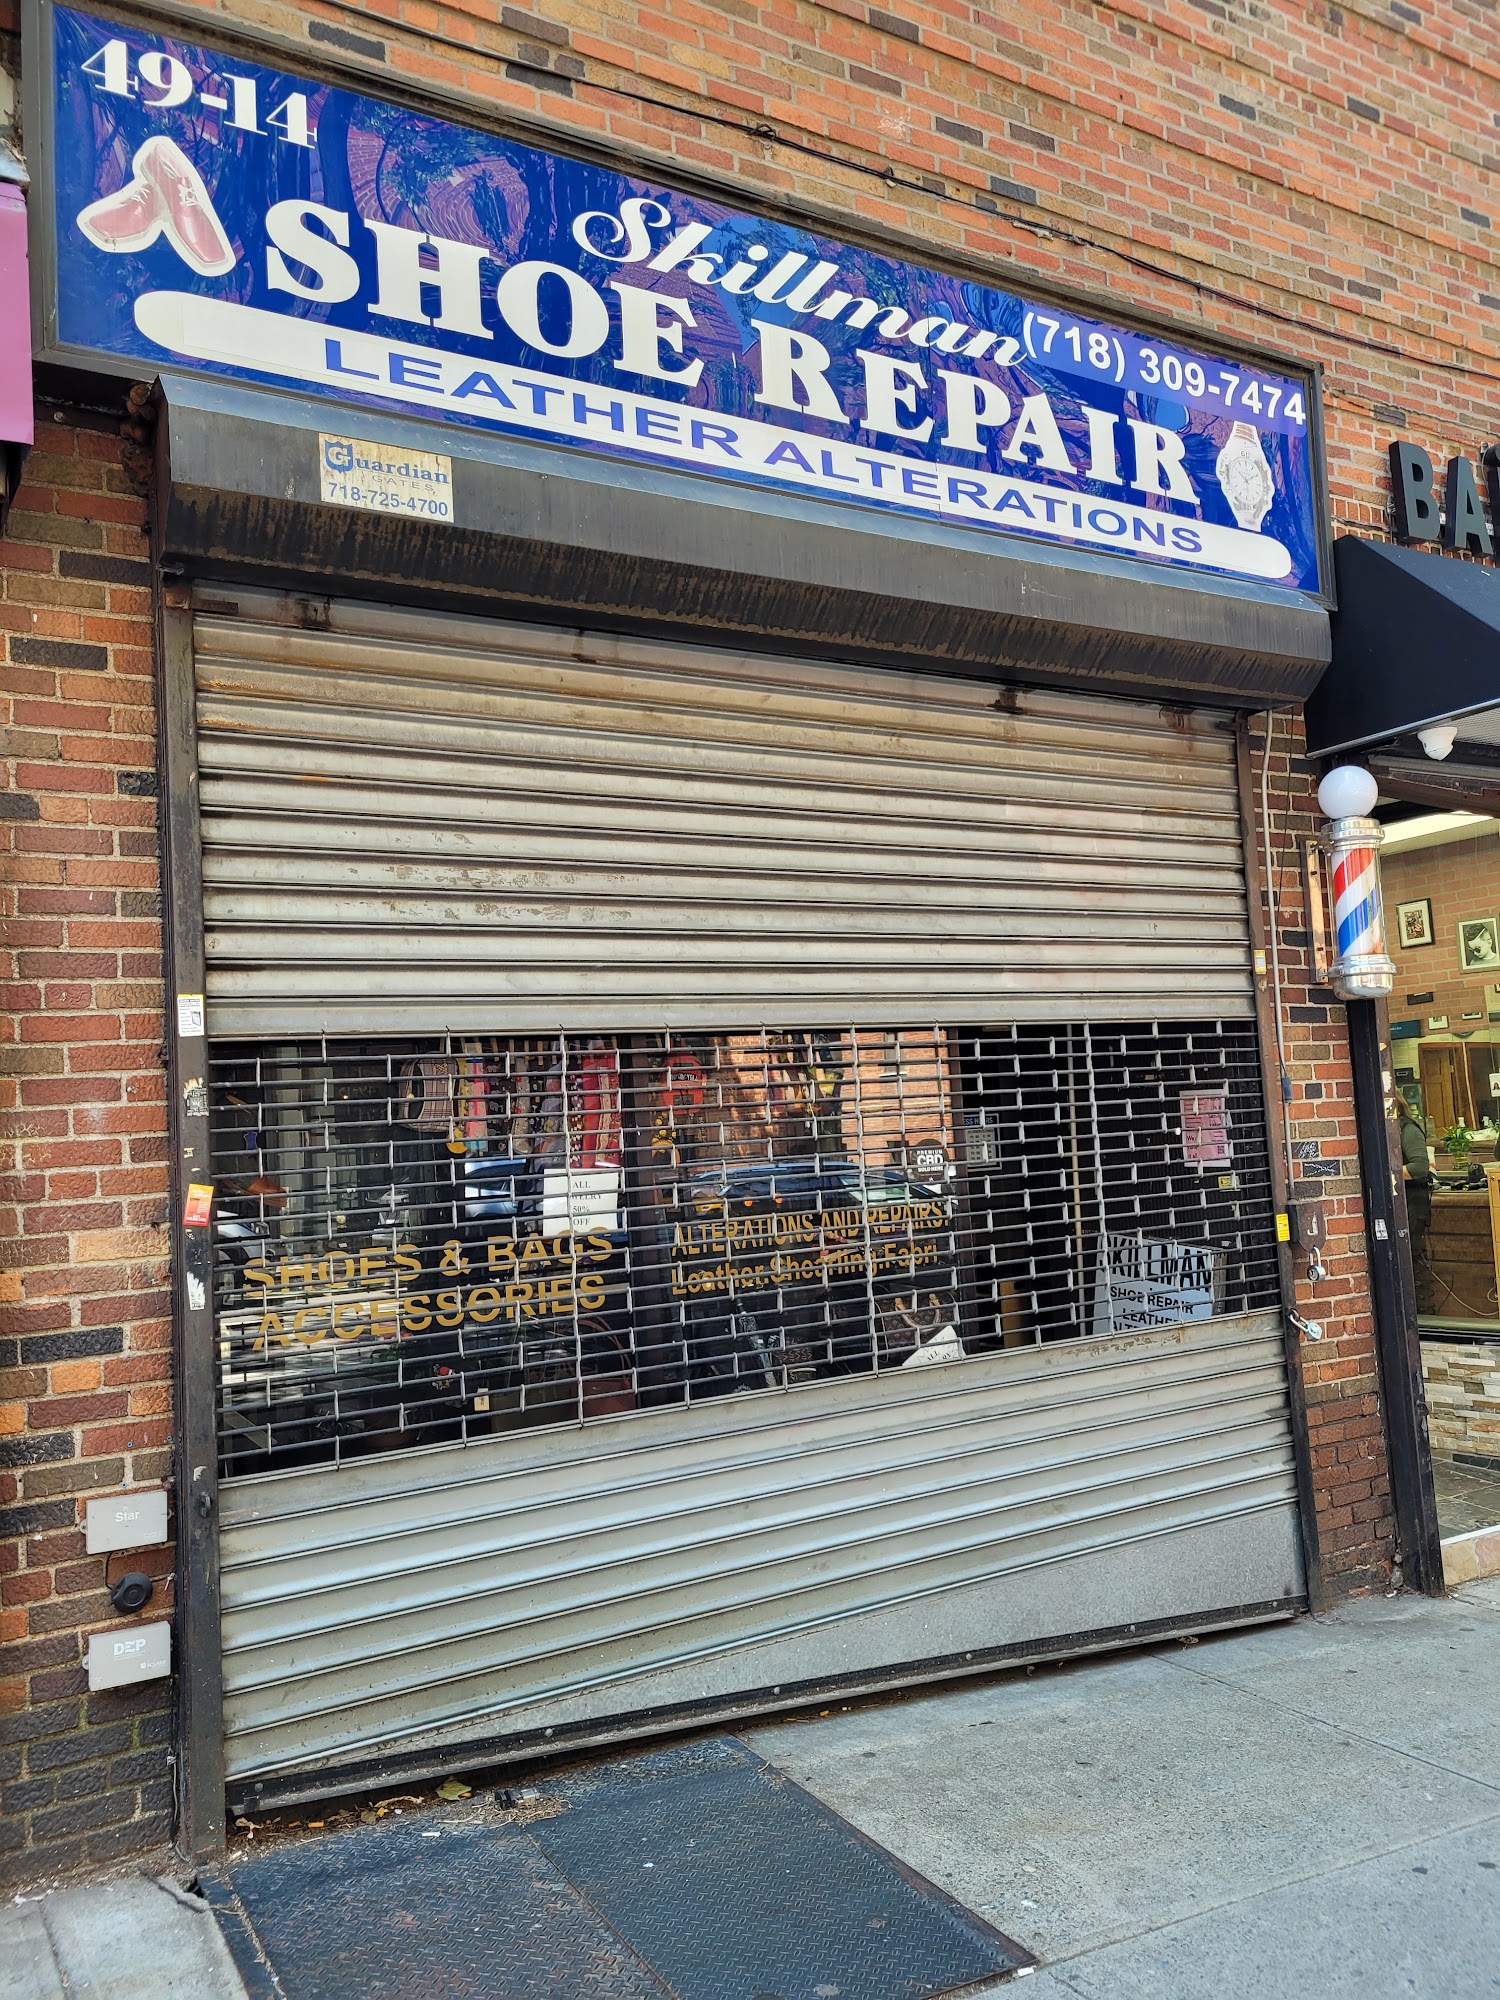 SKILLMAN SHOE REPAIR AND LEATHER ALTERATIONS 49-14 Skillman Ave, Woodside New York 11377